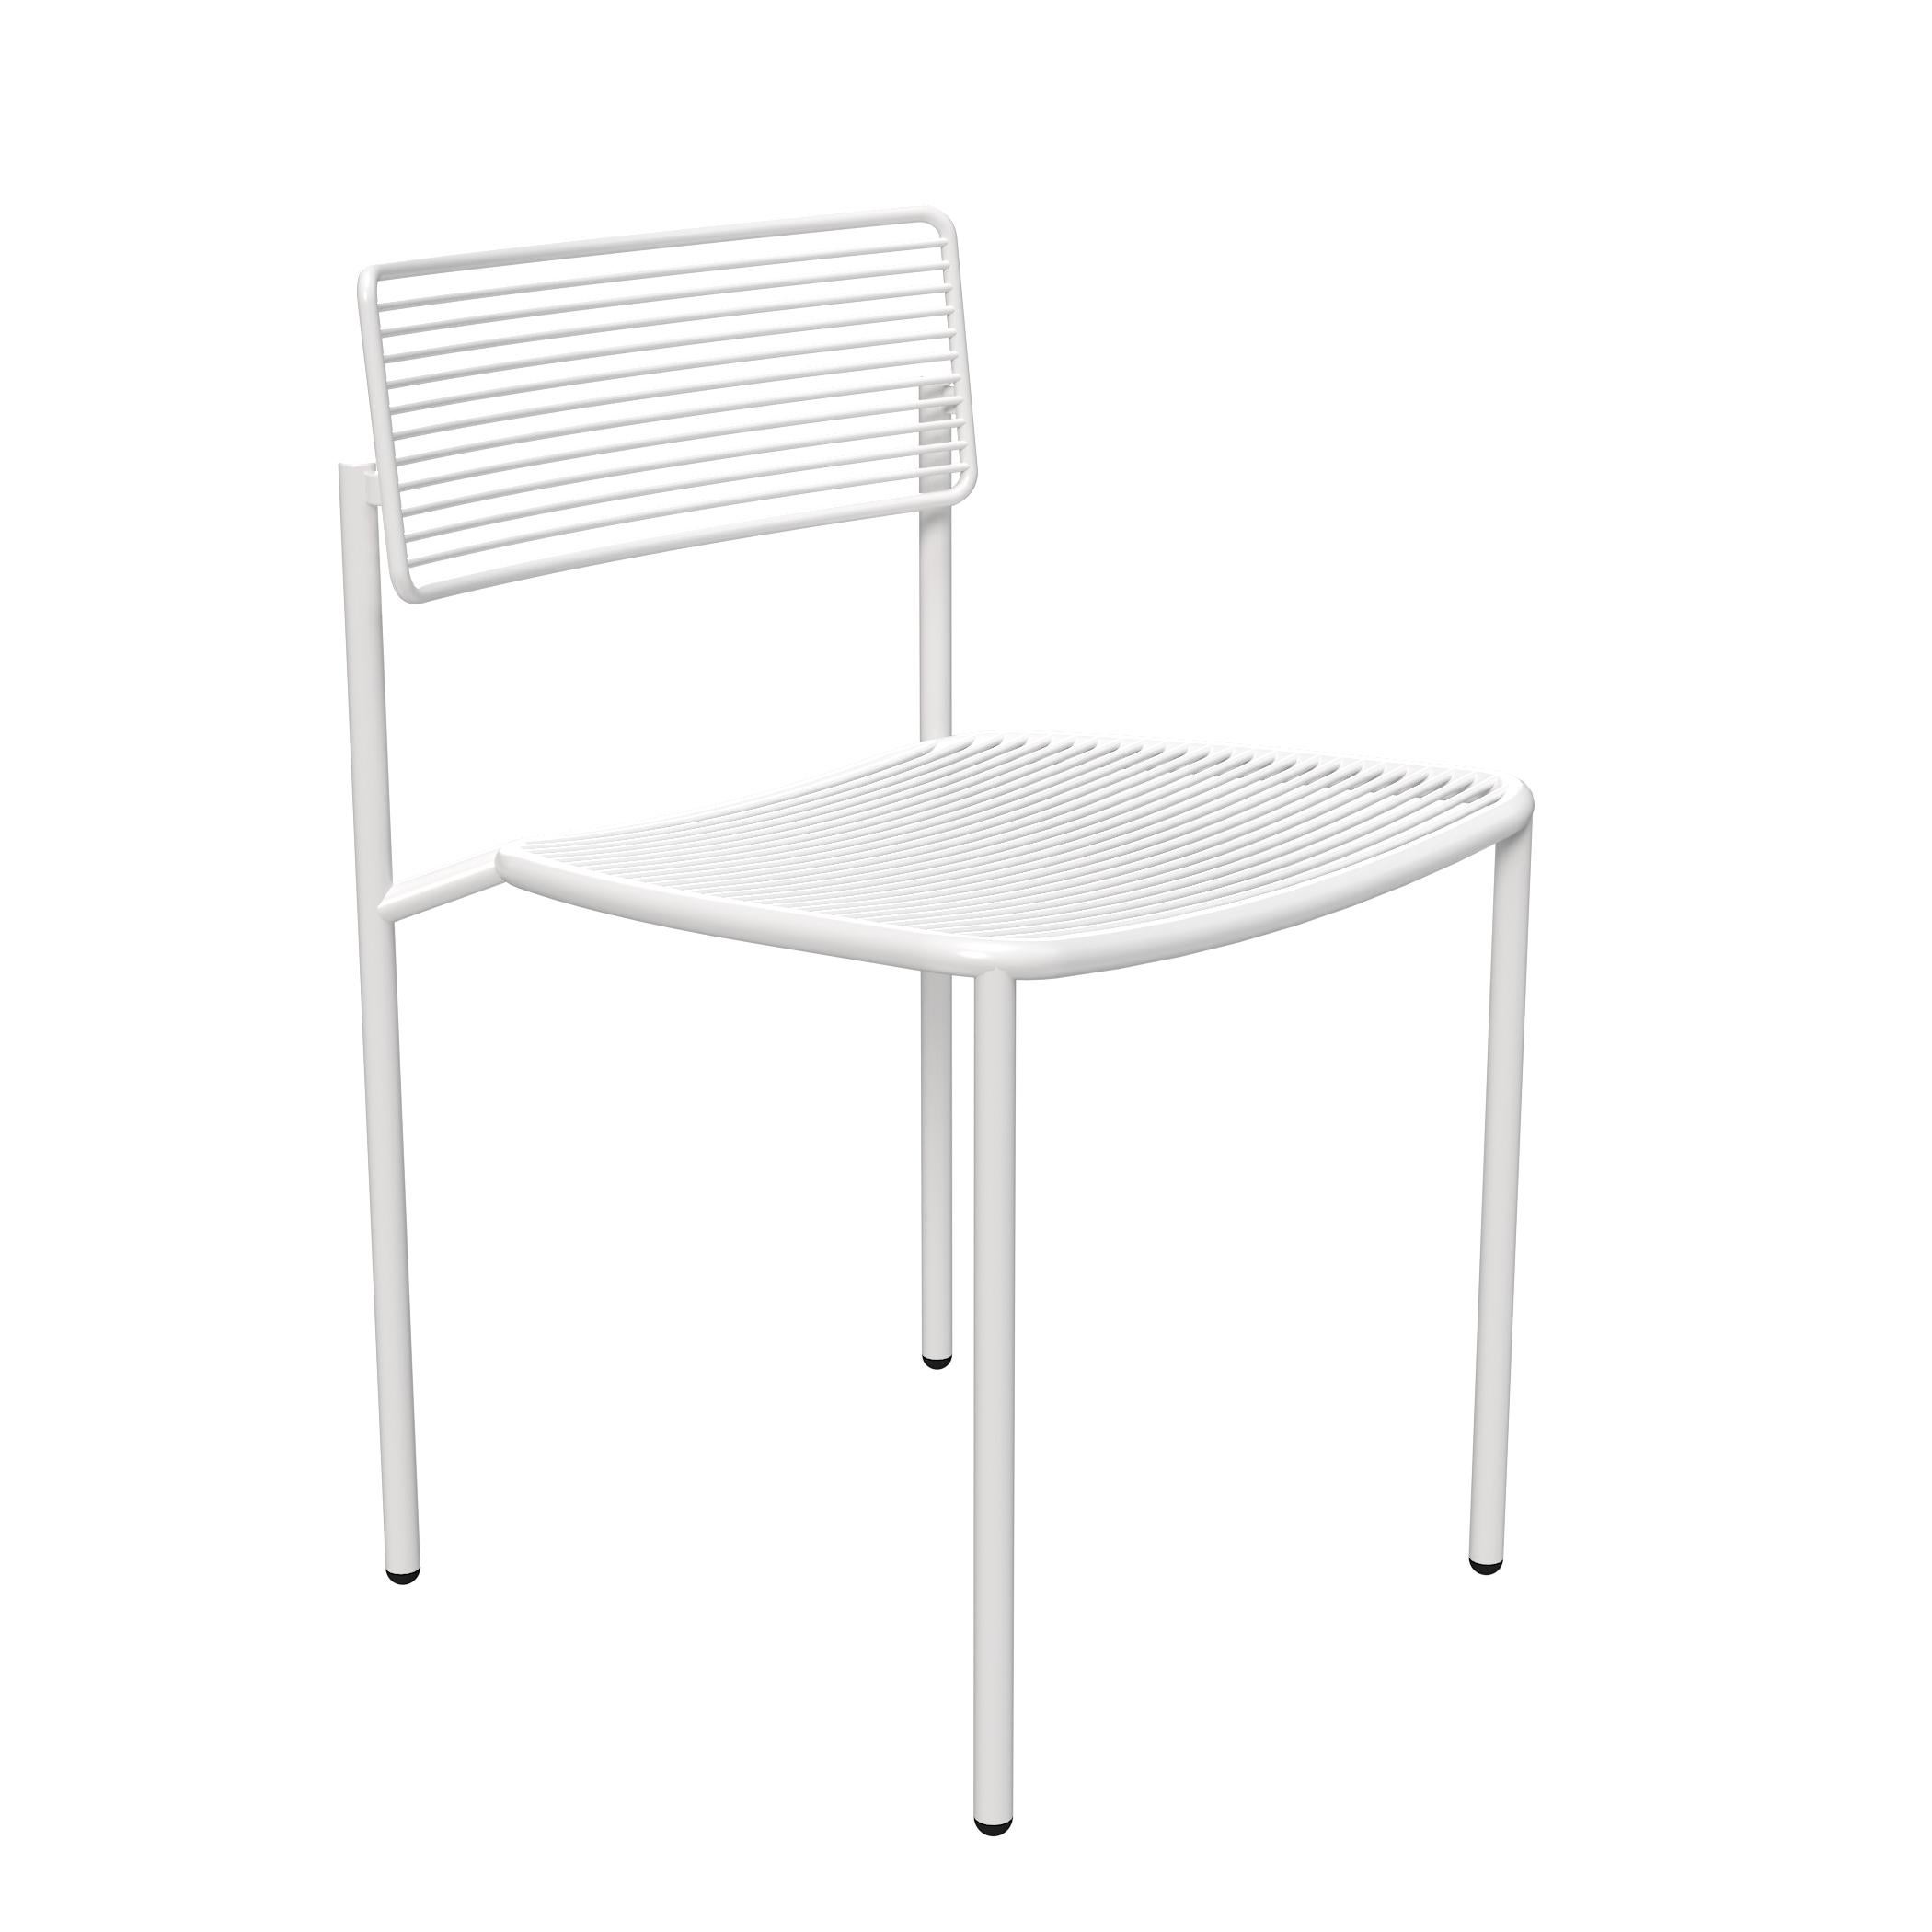 The rachel chair is designed with a well balanced wire pattern. It’s simplicity allows this dining chair to fit in any modern or contemporary interior. The robust and durable wire frame makes The rachel chair an ideal piece of wire furniture for